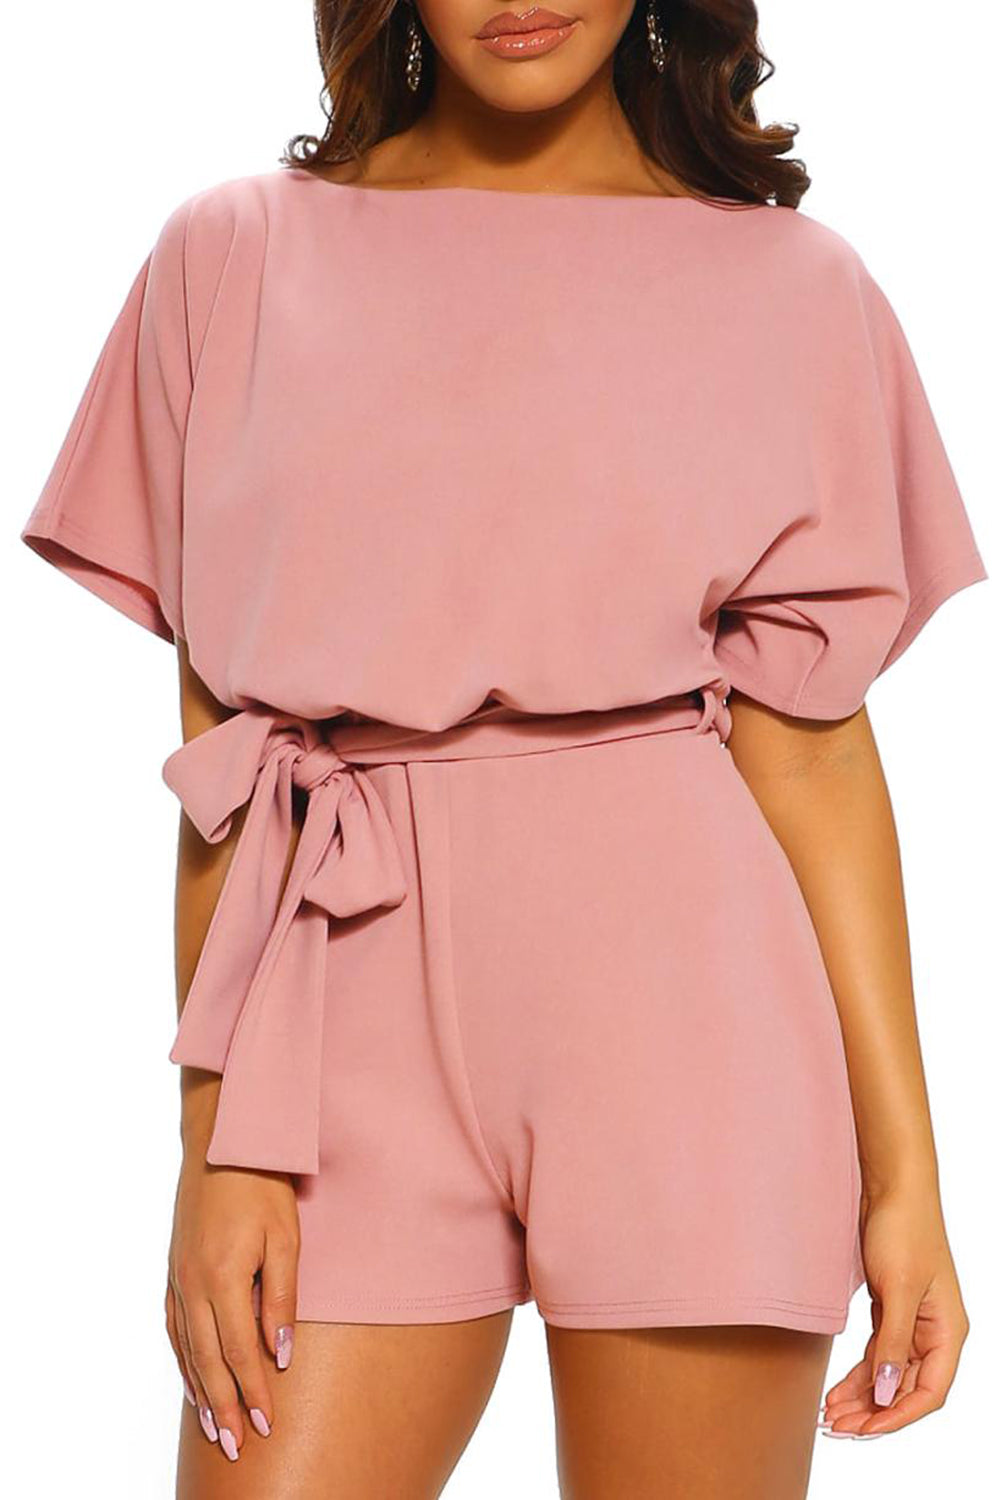 Pink Over The Top Belted Playsuit 95%Polyester+5%Spandex Jumpsuits & Rompers JT's Designer Fashion